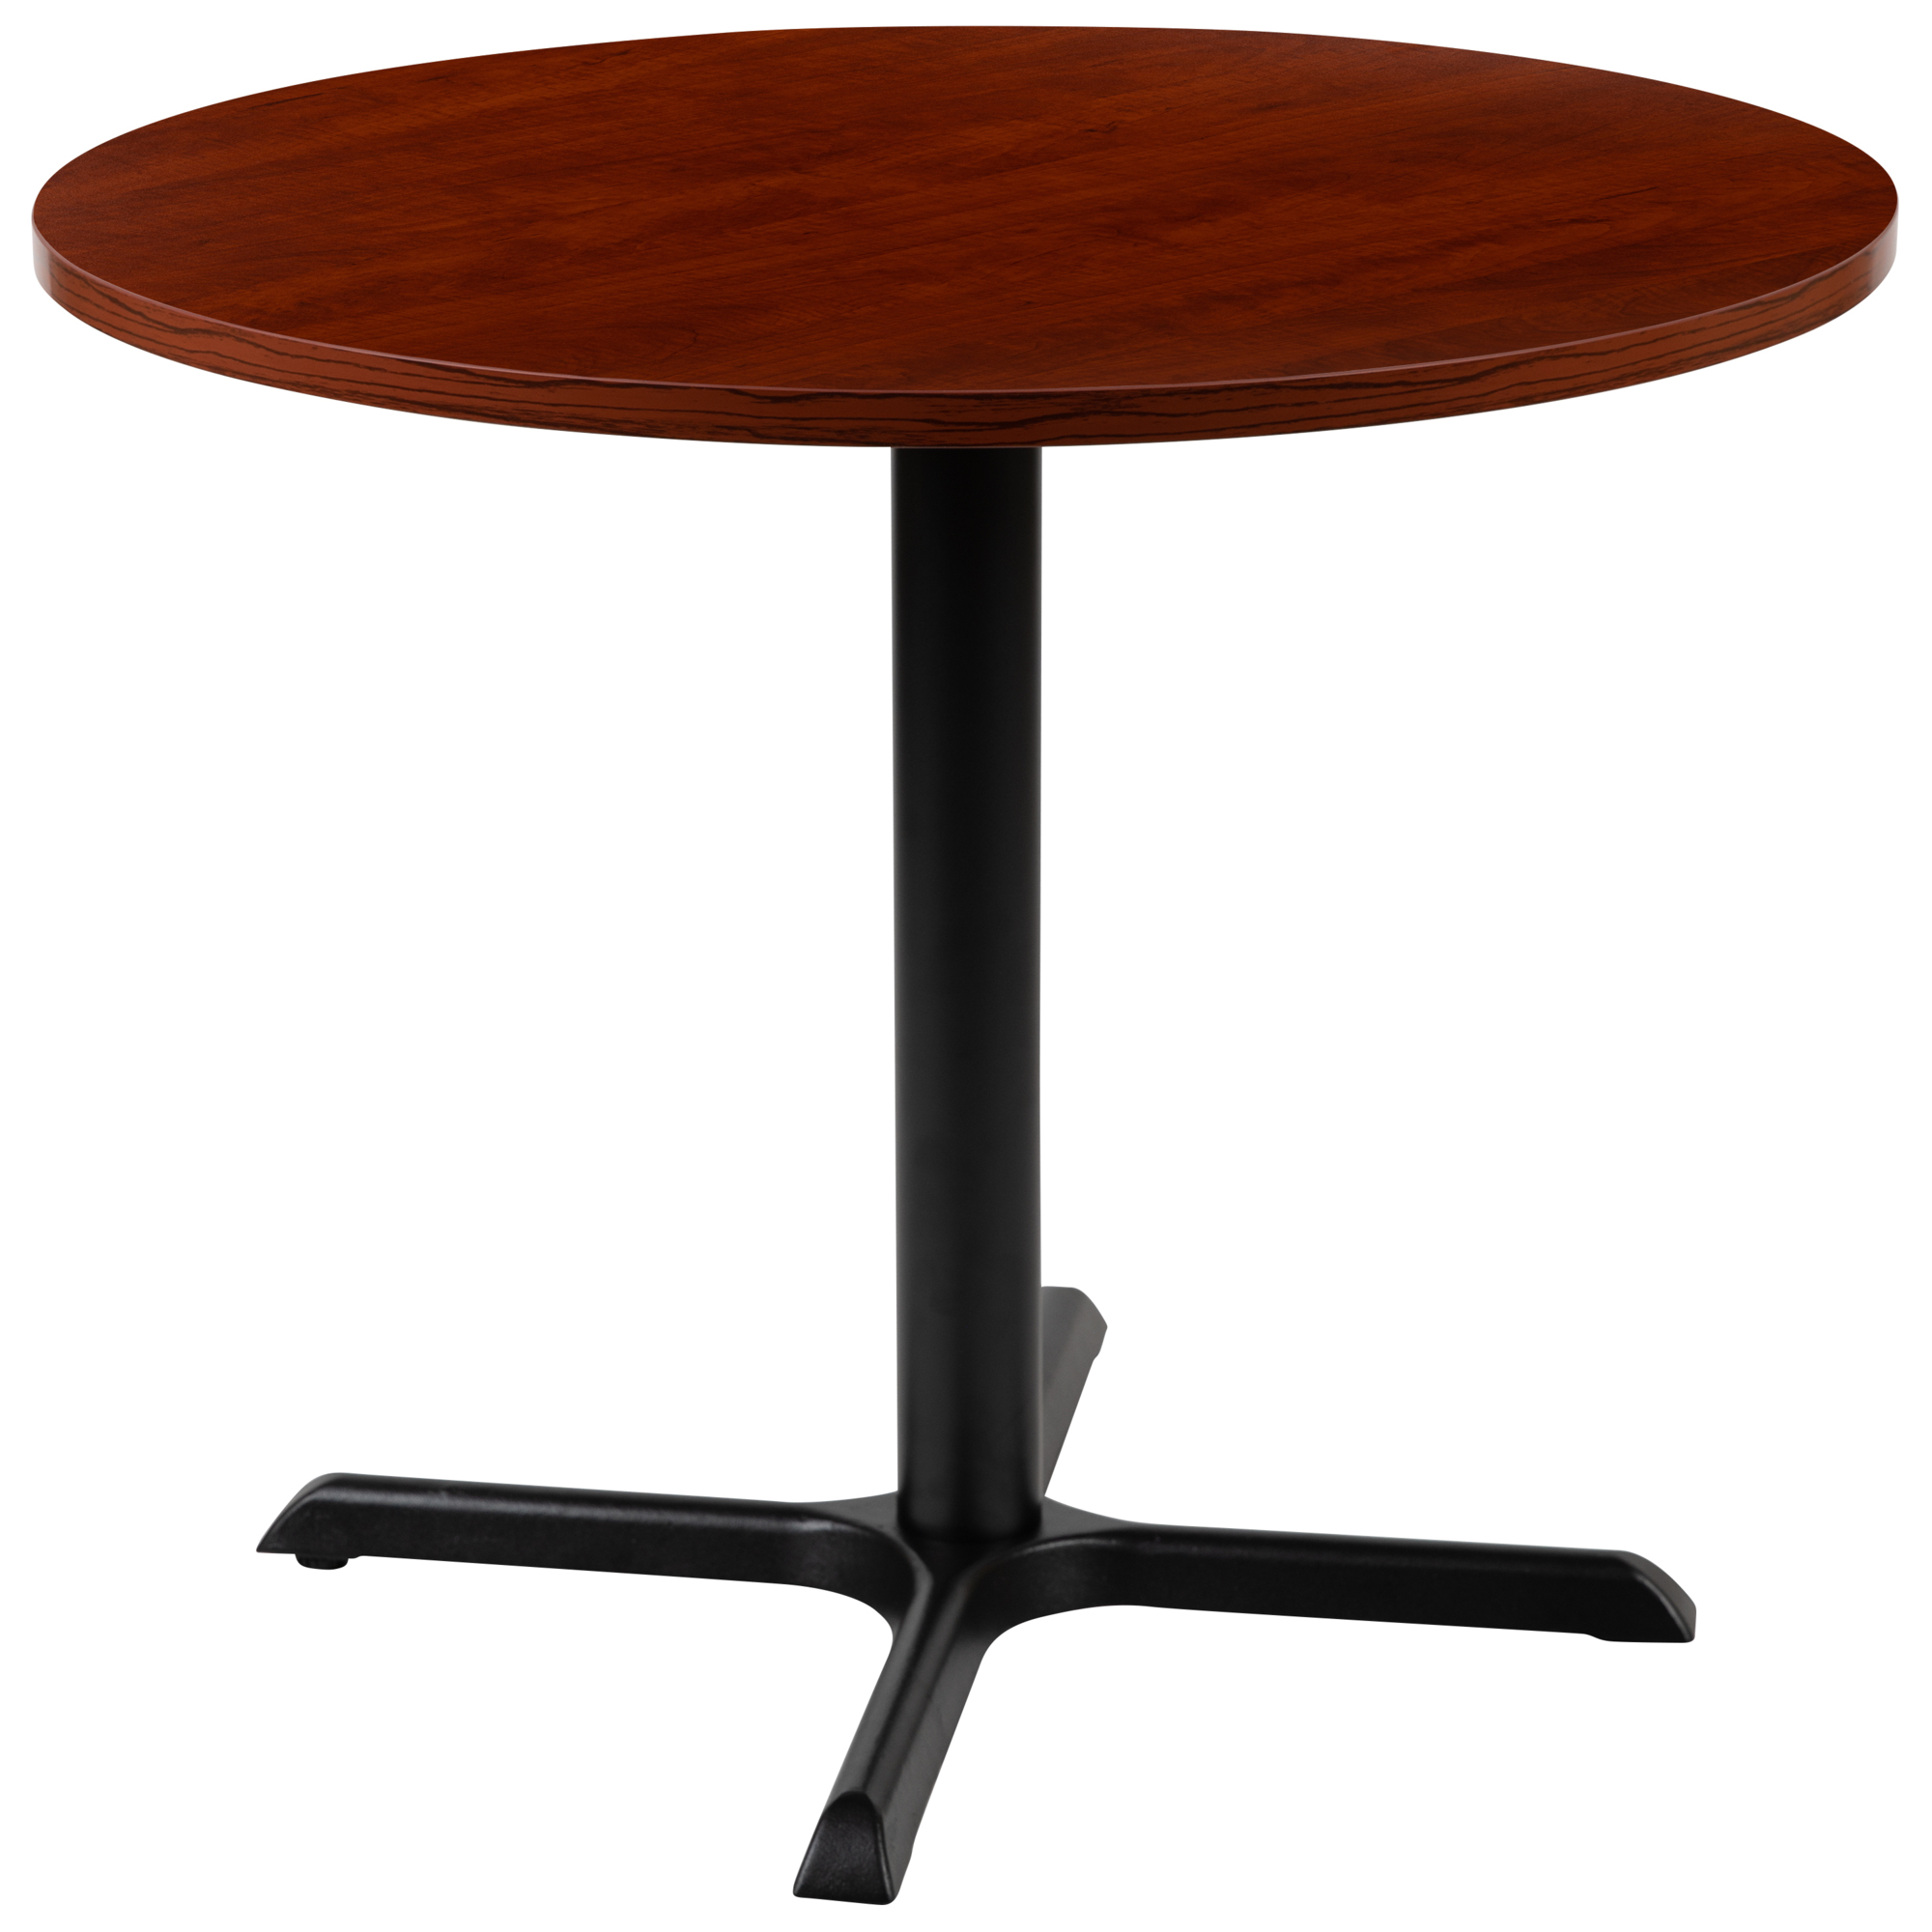 Flash Furniture, 36Inch Round Conference Table in Cherry, Height 30 in, Width 35.5 in, Length 35.5 in, Model GCMBLK15CHR